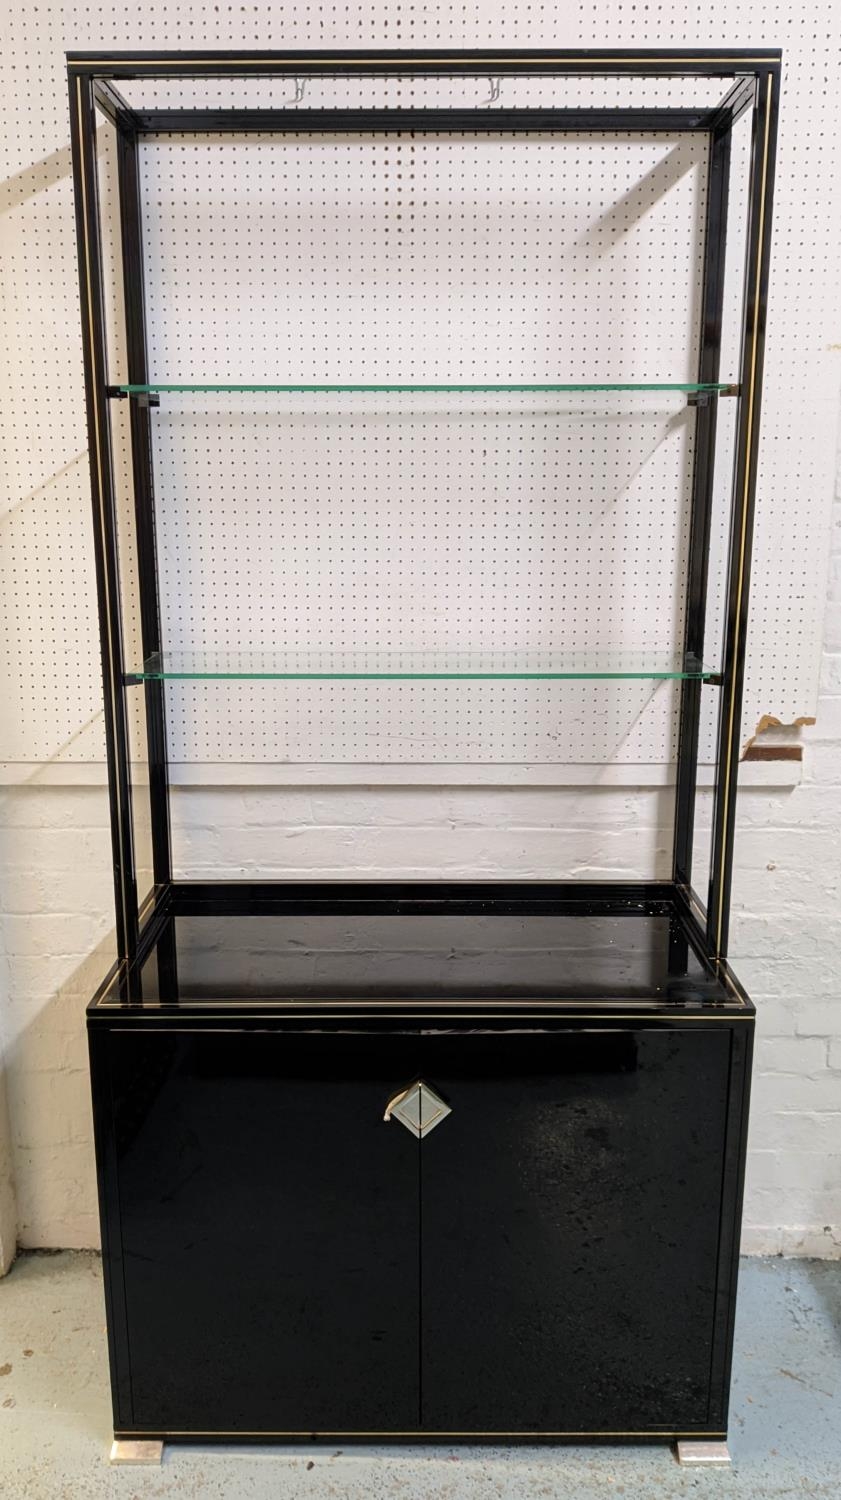 PIERRE VANDEL OPEN DISPLAY CABINET, vintage 1970's French, lacquered metal and glass, 91cm x 45cm - Image 2 of 6